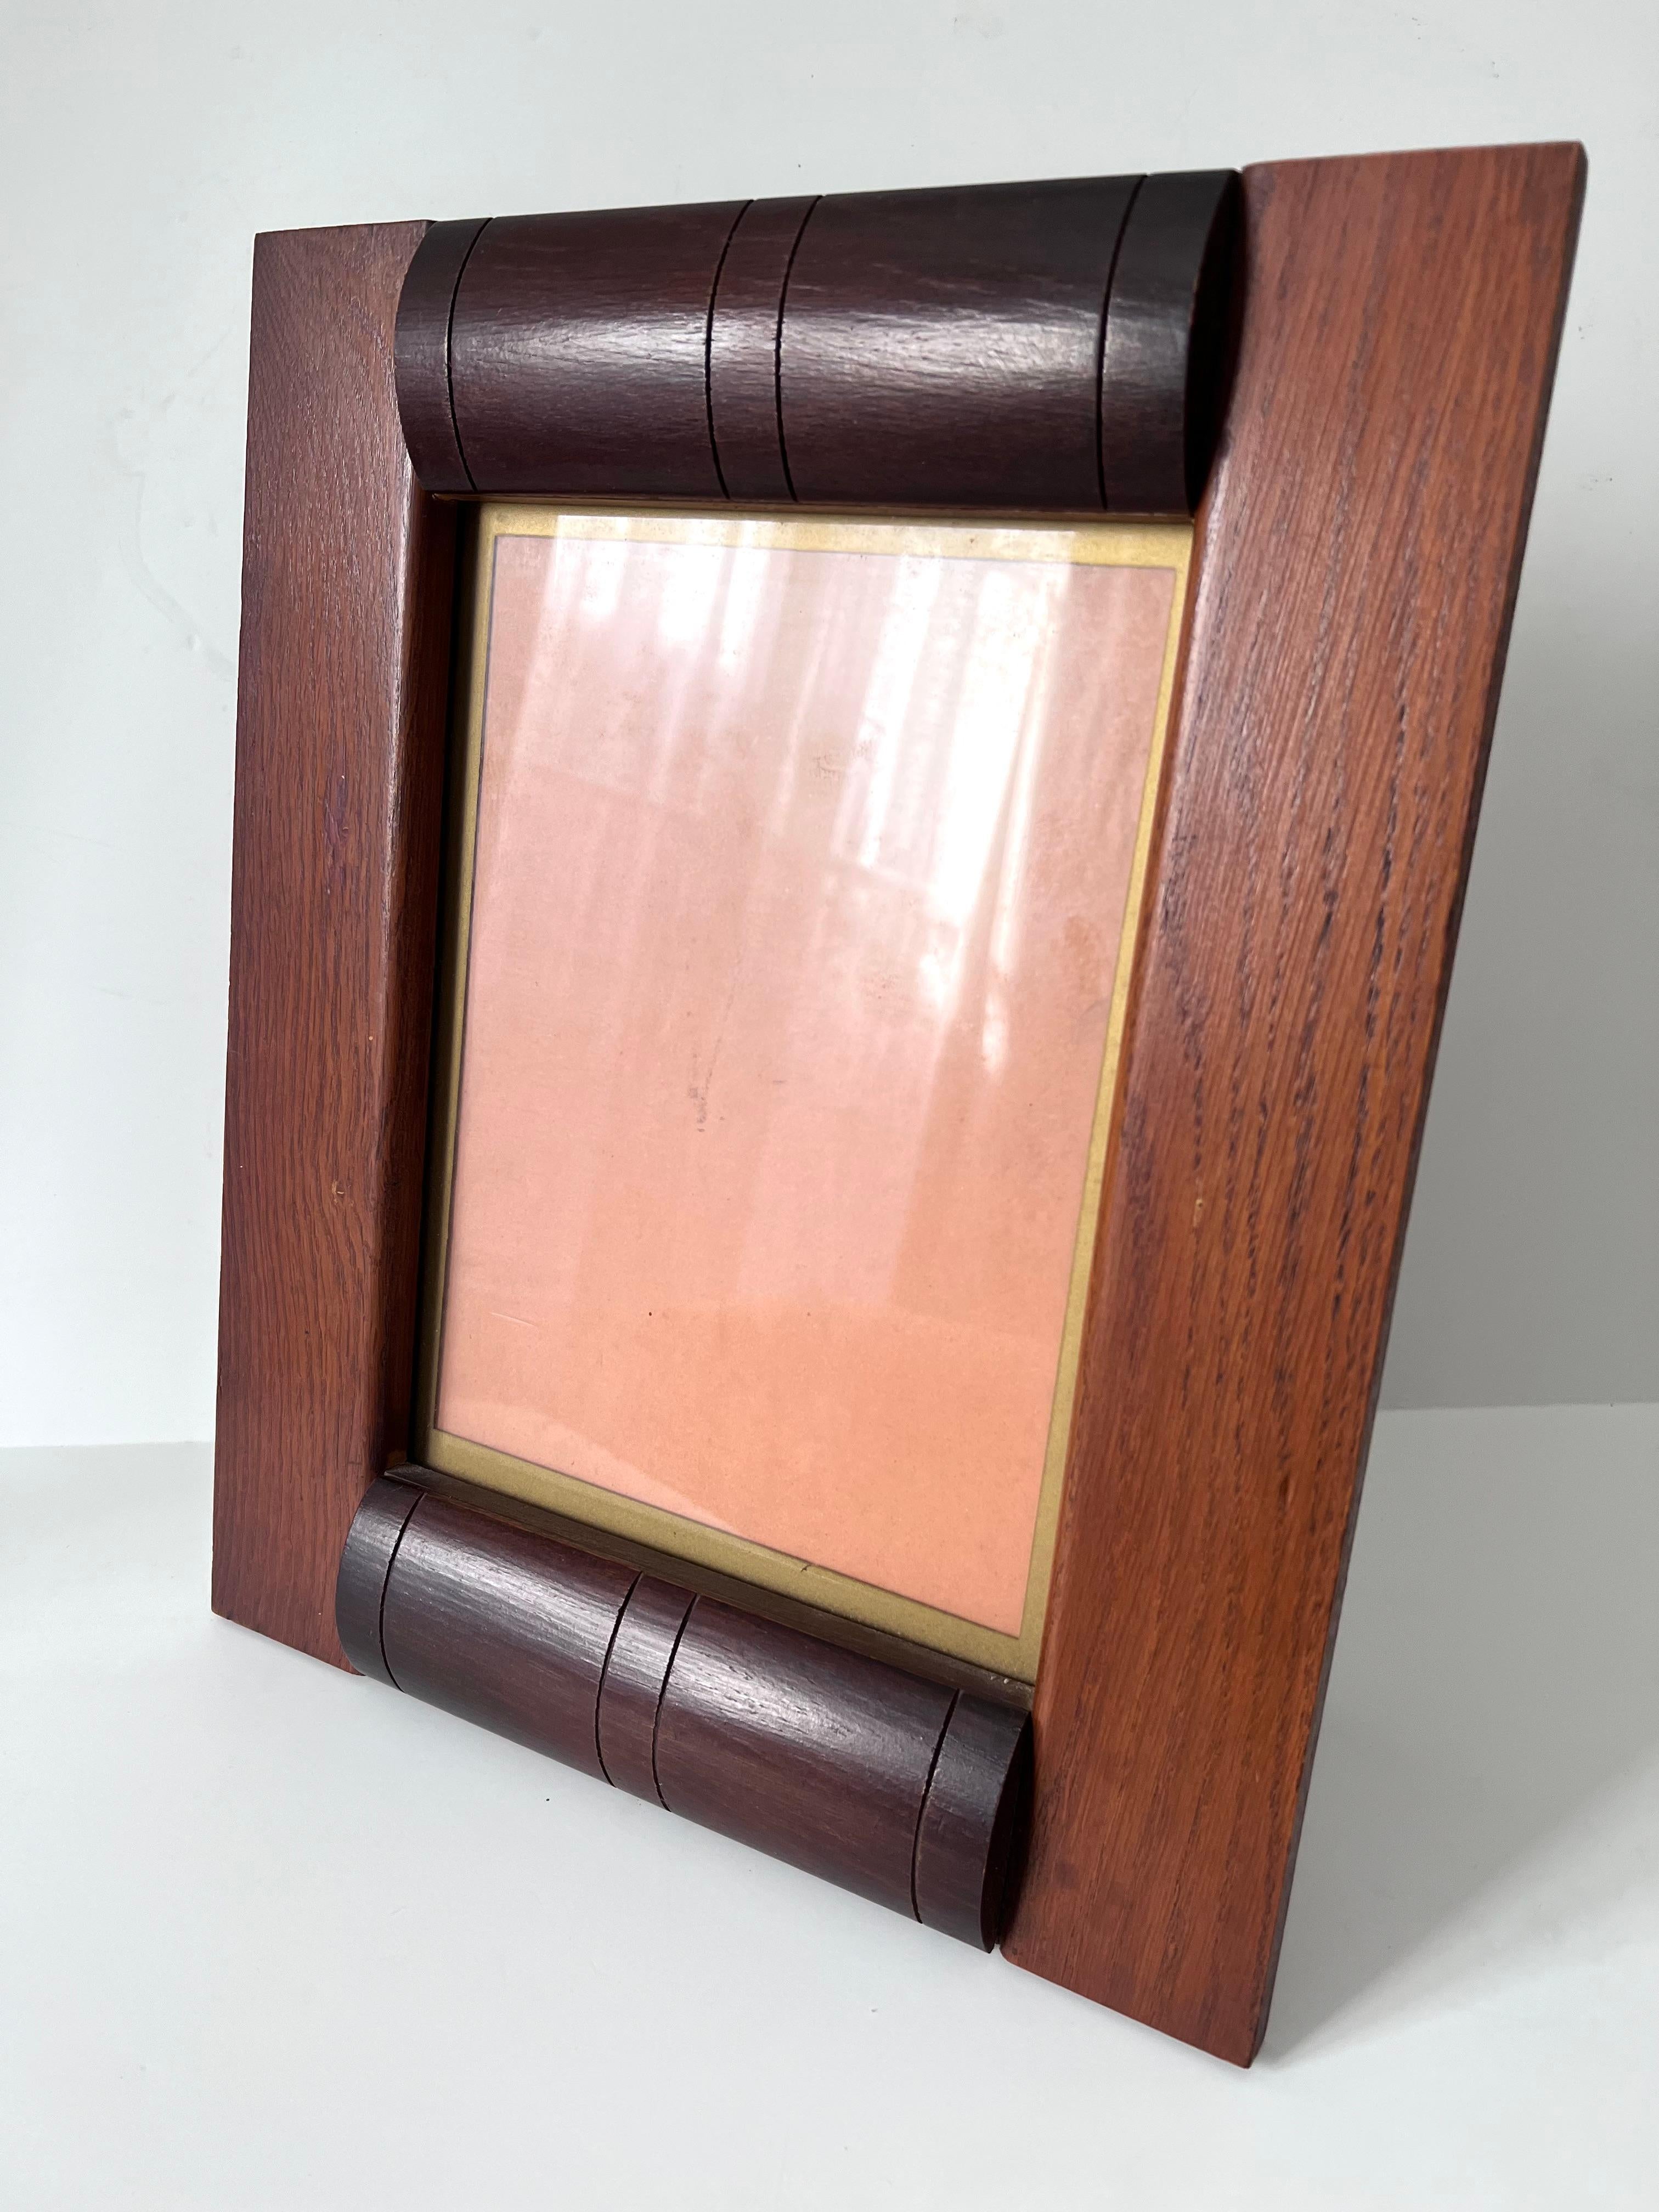 Acquired in Paris France, a stunning Art Deco, Arts and Crafts wooden picture frame. Likely hand made and out of two different woods. Simple, yet stunning. The glass has a gold rim which adds to the overall detail of the frame. 

A compliment to